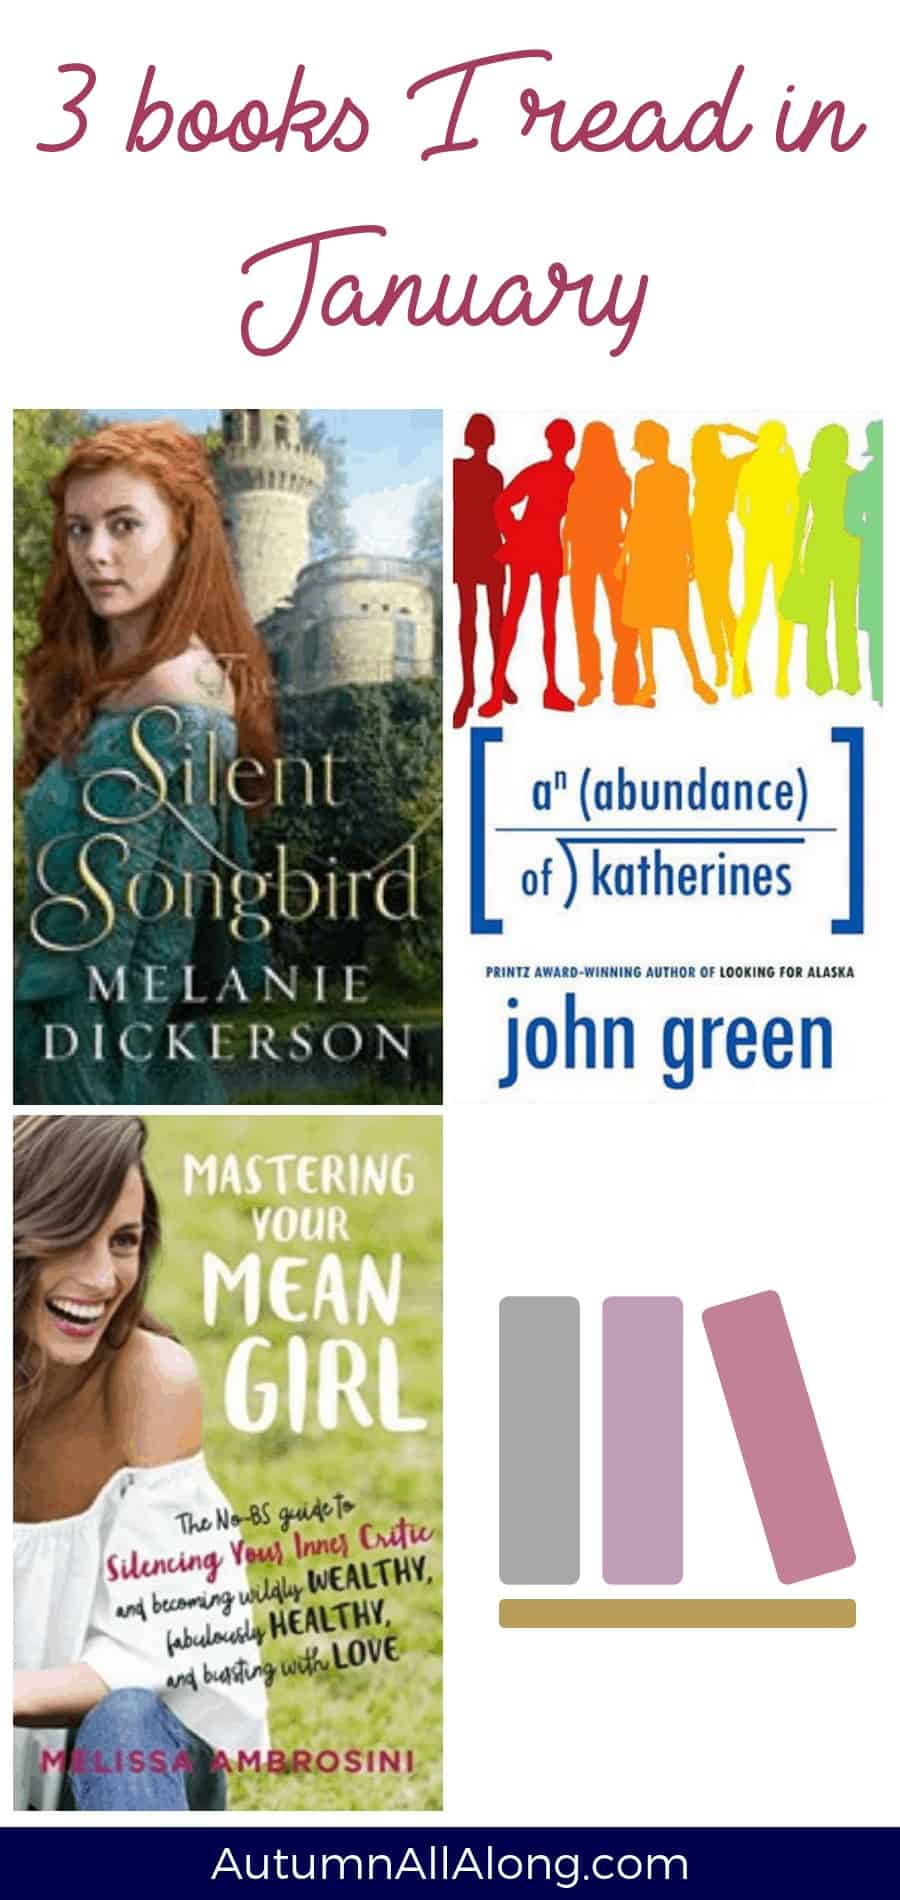 These are the books I read in January and what I thought about them. Reviews on: Mastering your Mean Girl, The Silent Songbird, and An Abundance of Katherine's. | via Autumn All Along